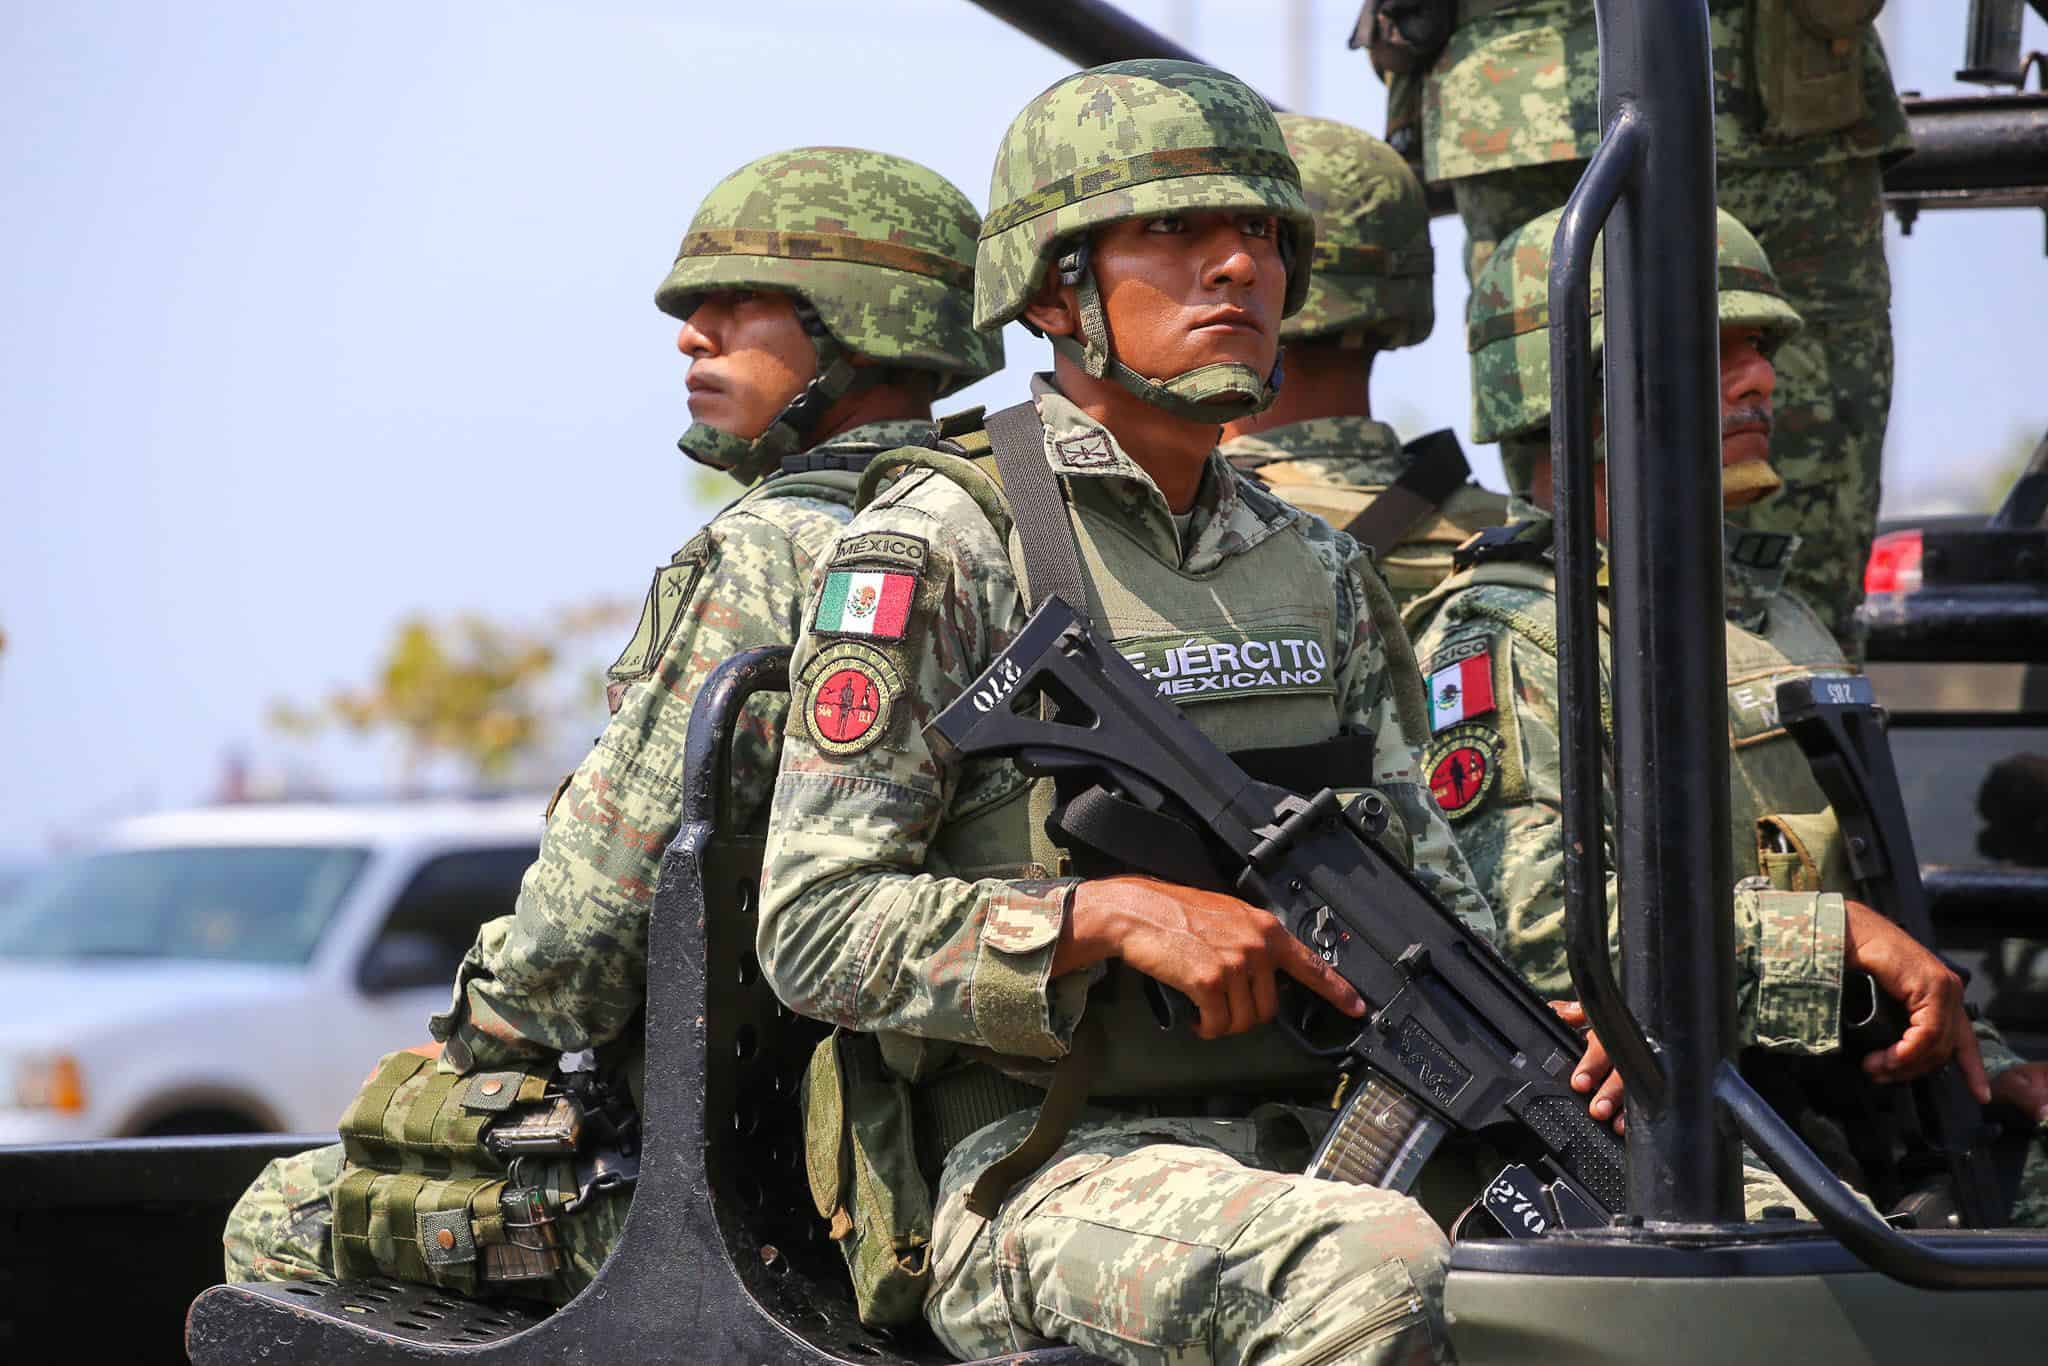 Mexican army soldiers on patrol in Guerrero